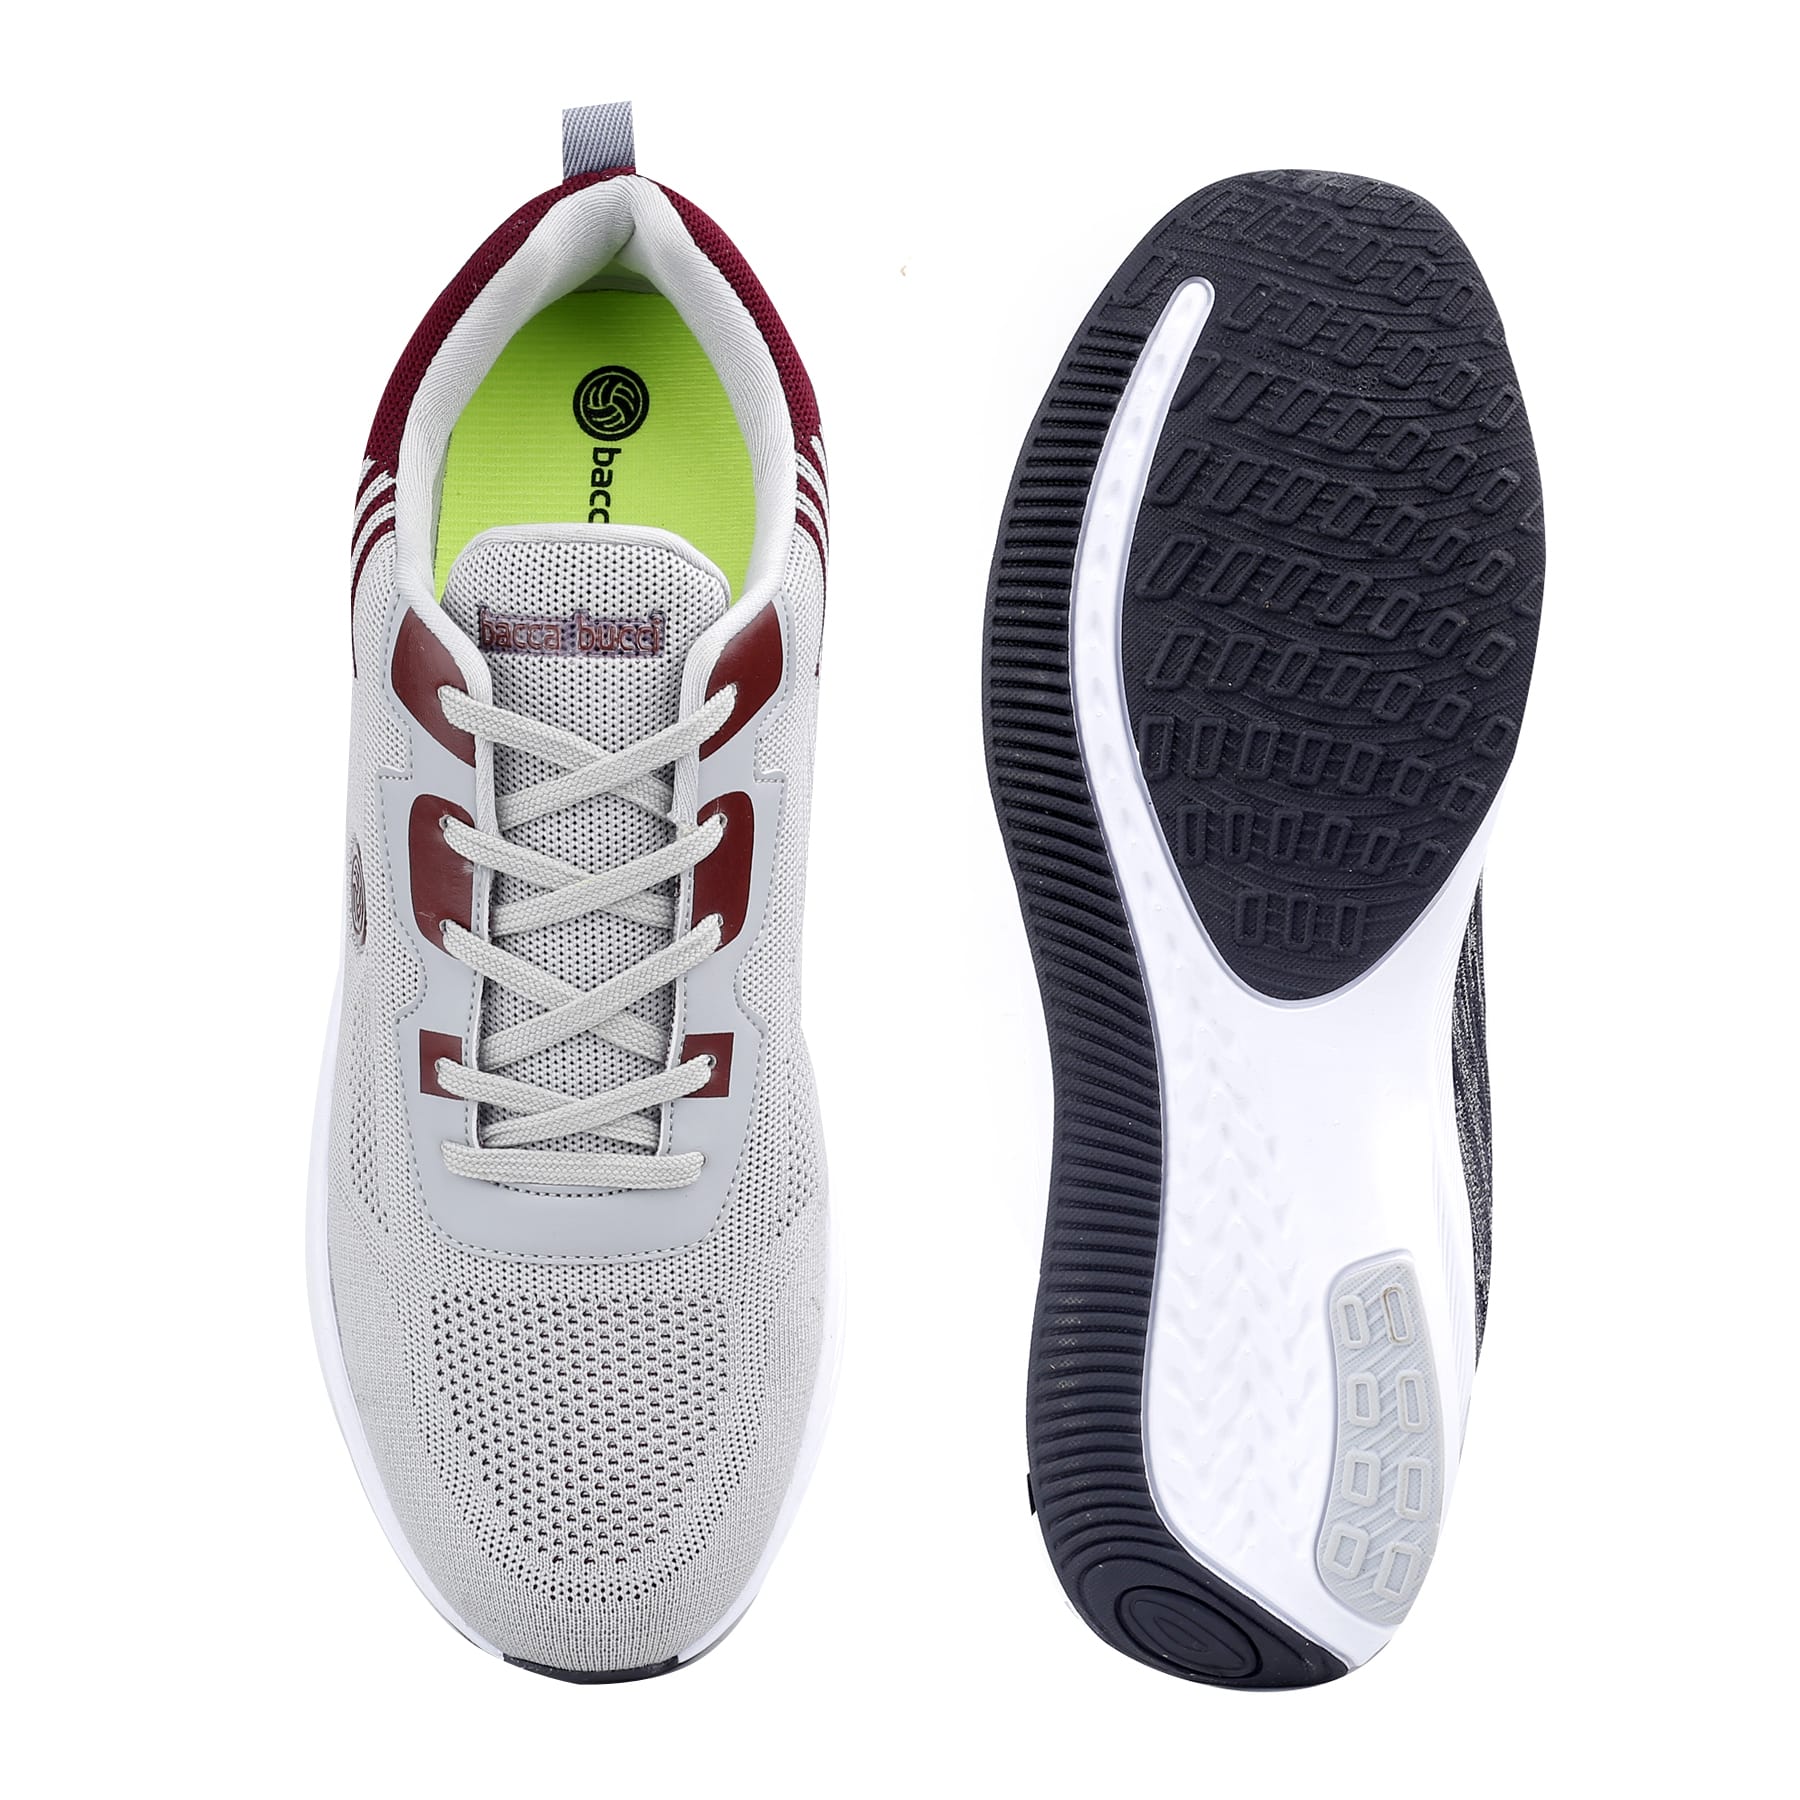 Bacca Bucci PROJECT PLUS Running Walking Training Shoe Specially developed for wide and Large Foots | Only Big Sizes Available | UK-11 to 15